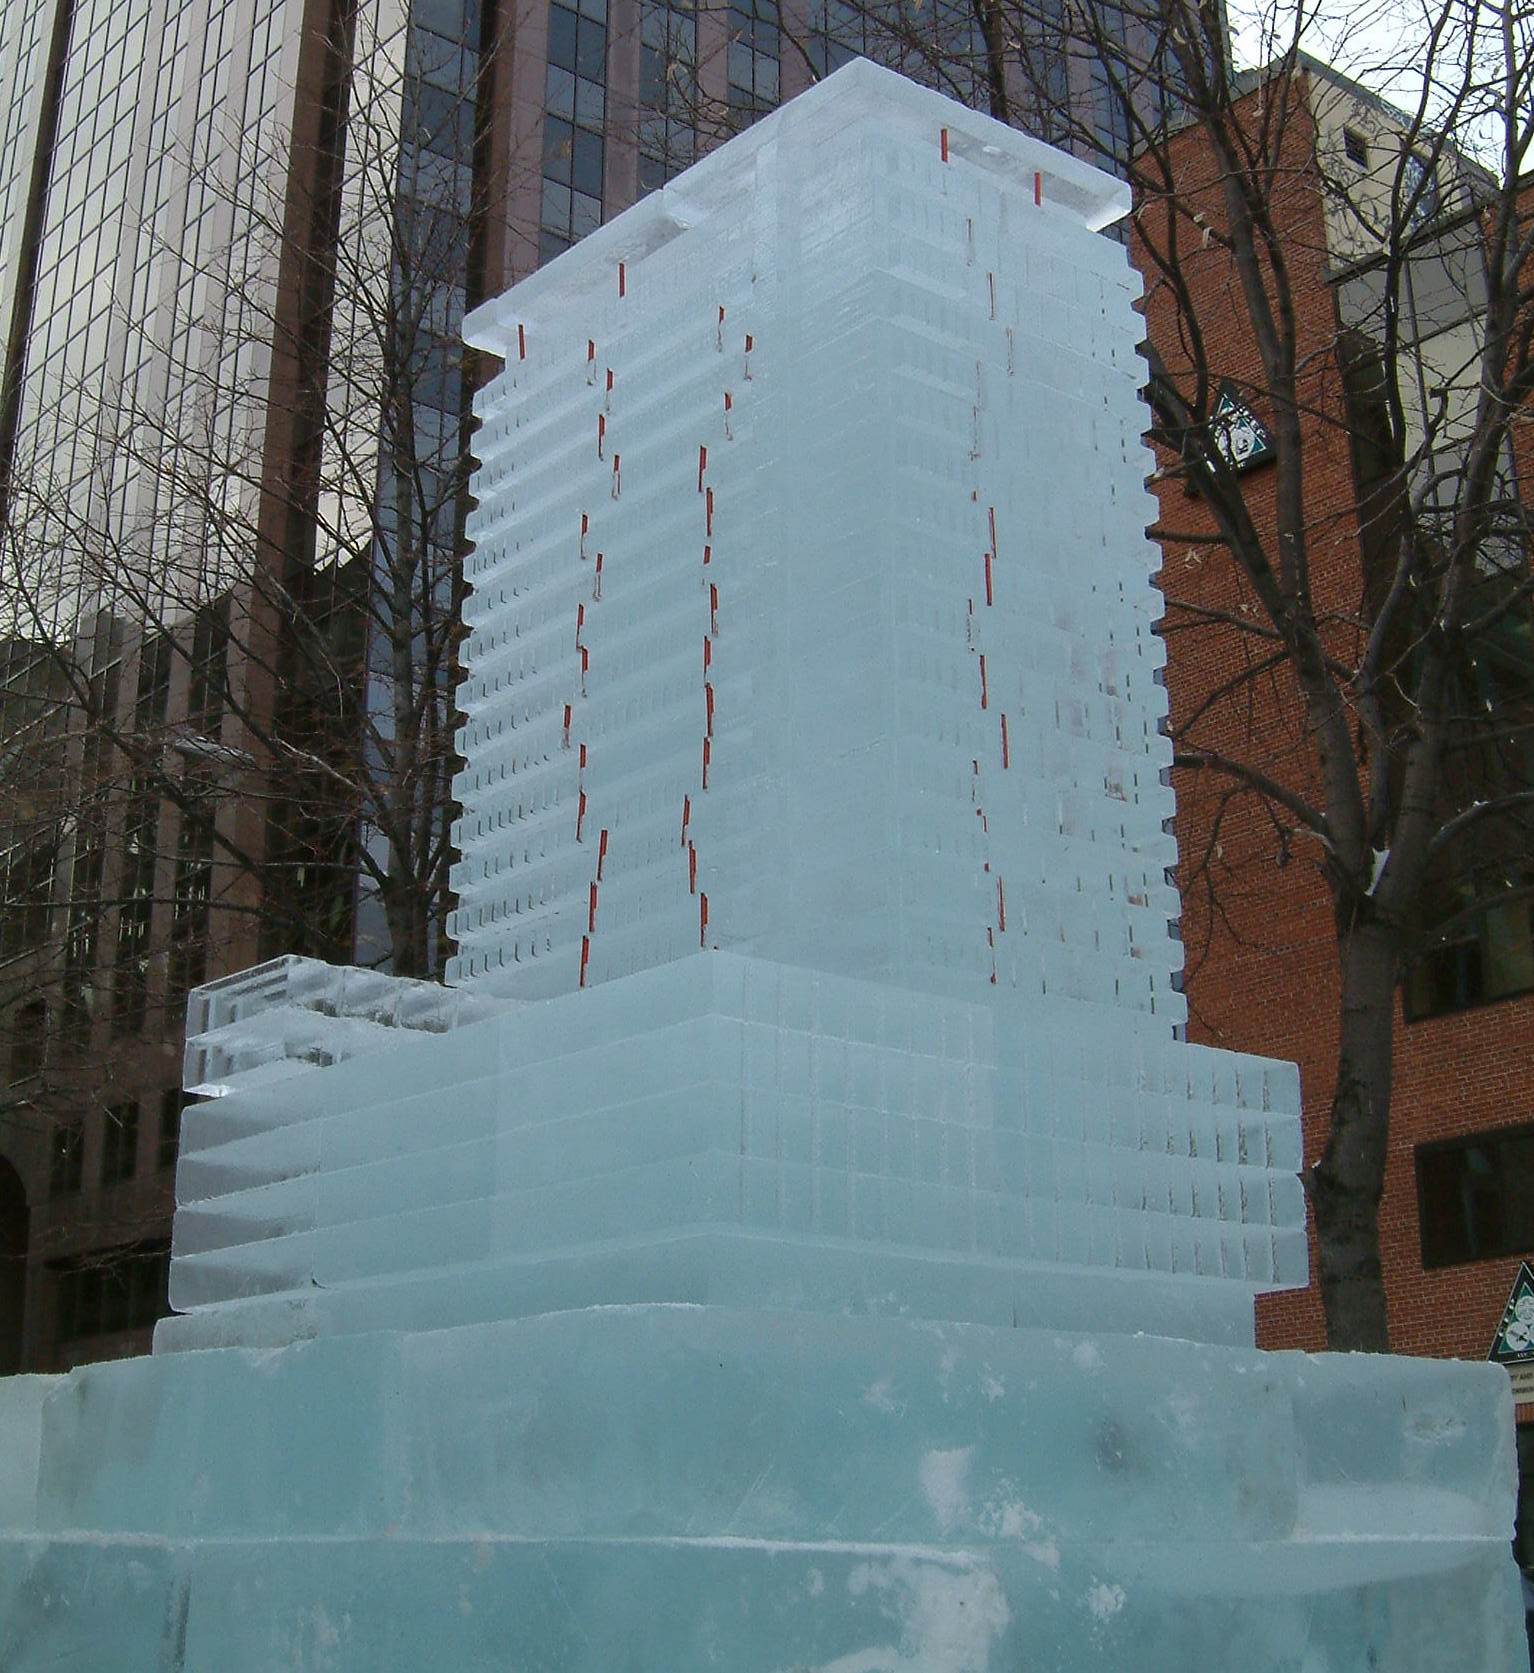 Building made out of ice